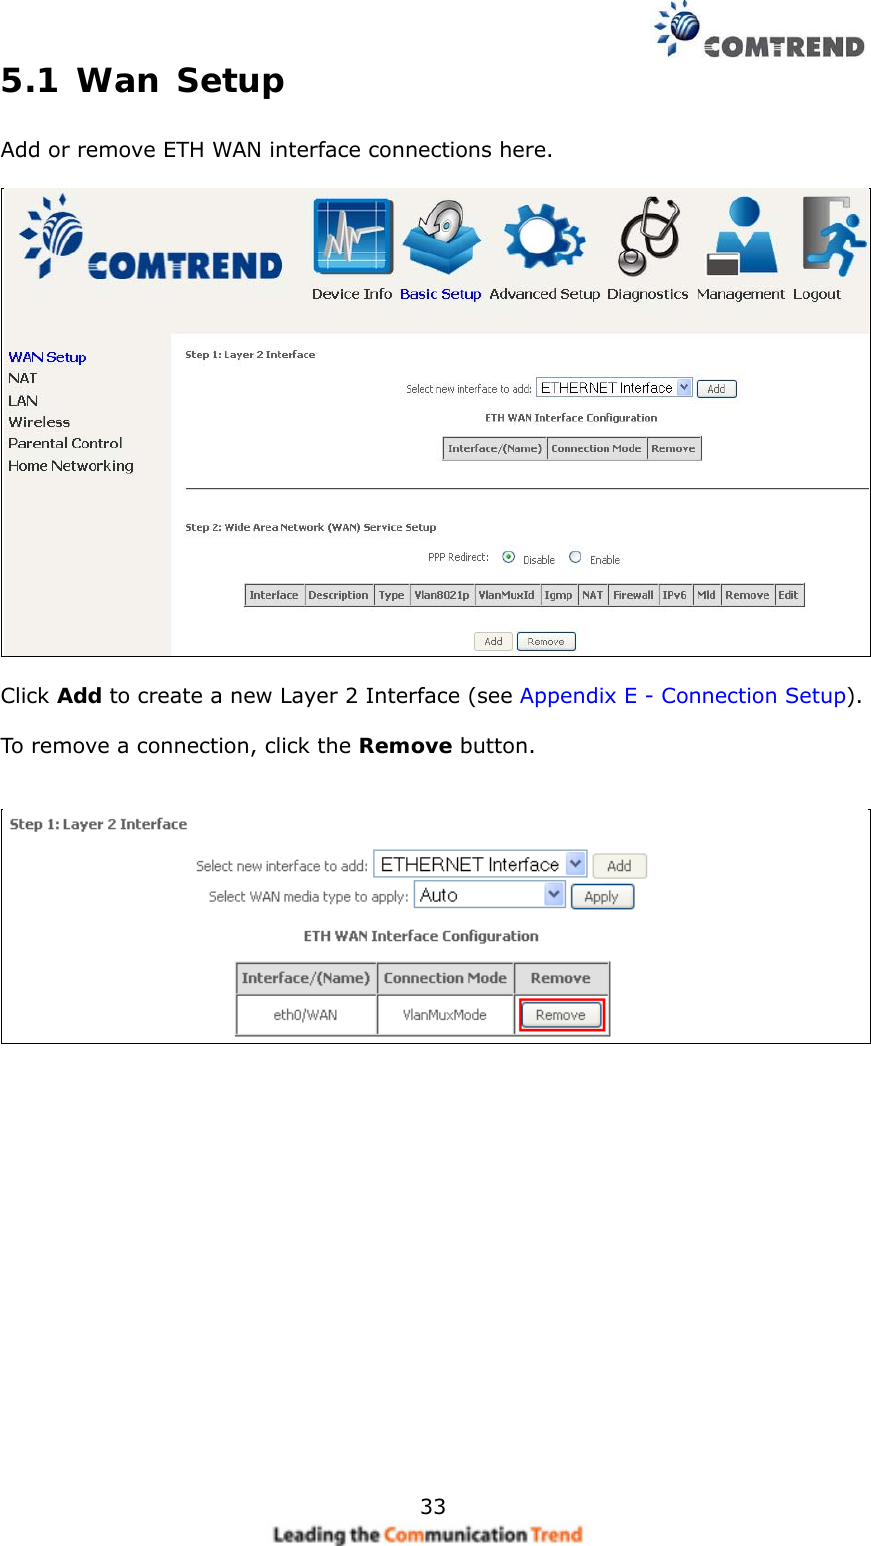    335.1 Wan Setup Add or remove ETH WAN interface connections here.      Click Add to create a new Layer 2 Interface (see Appendix E - Connection Setup).  To remove a connection, click the Remove button.   